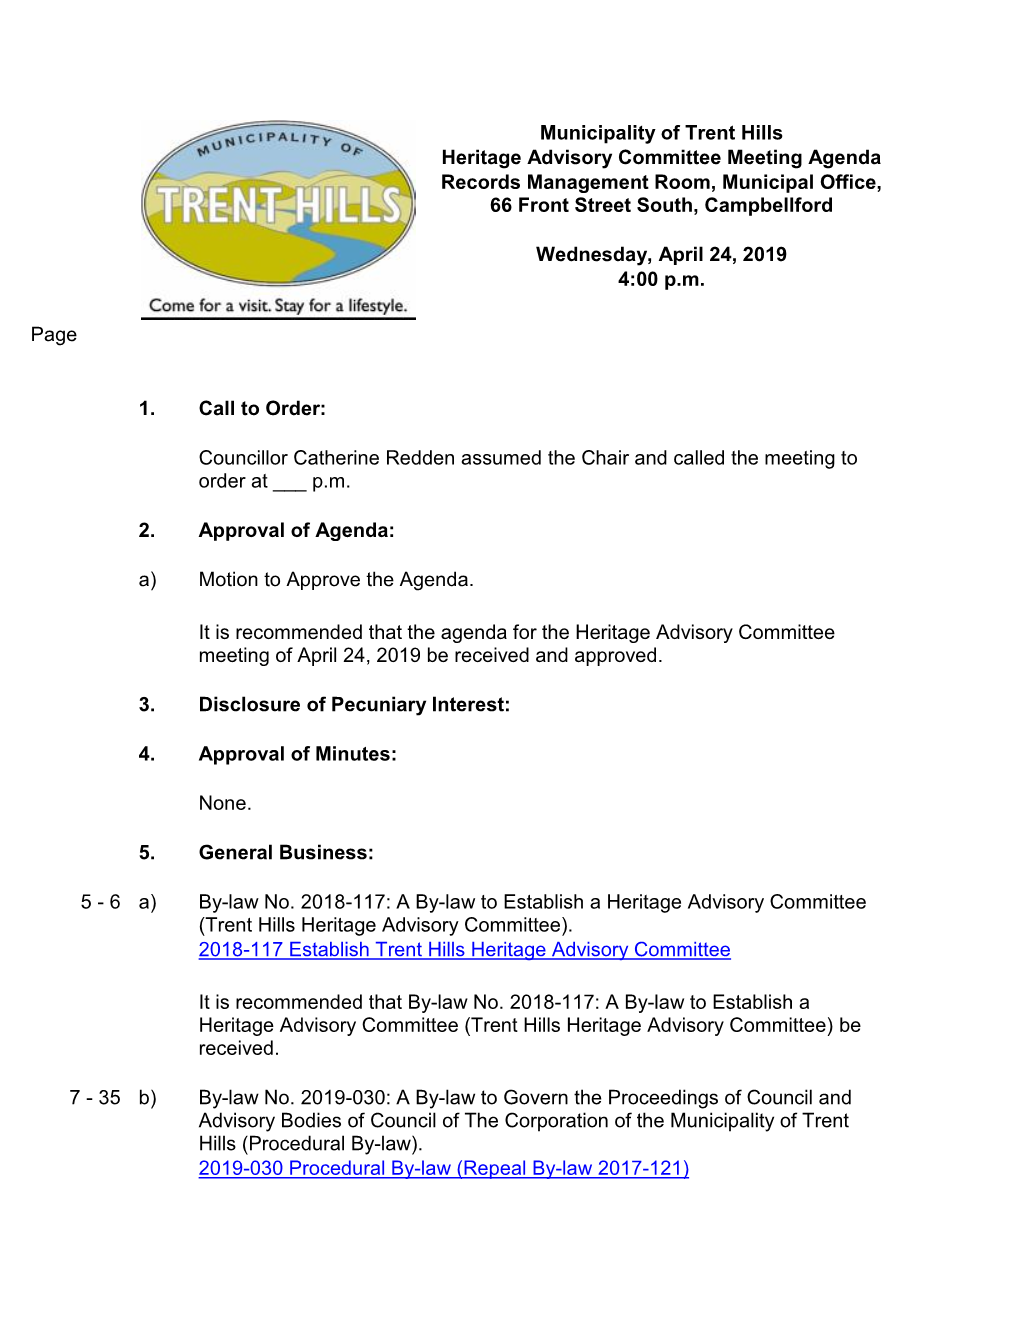 Heritage Advisory Committee Meeting Agenda Records Management Room, Municipal Office, 66 Front Street South, Campbellford